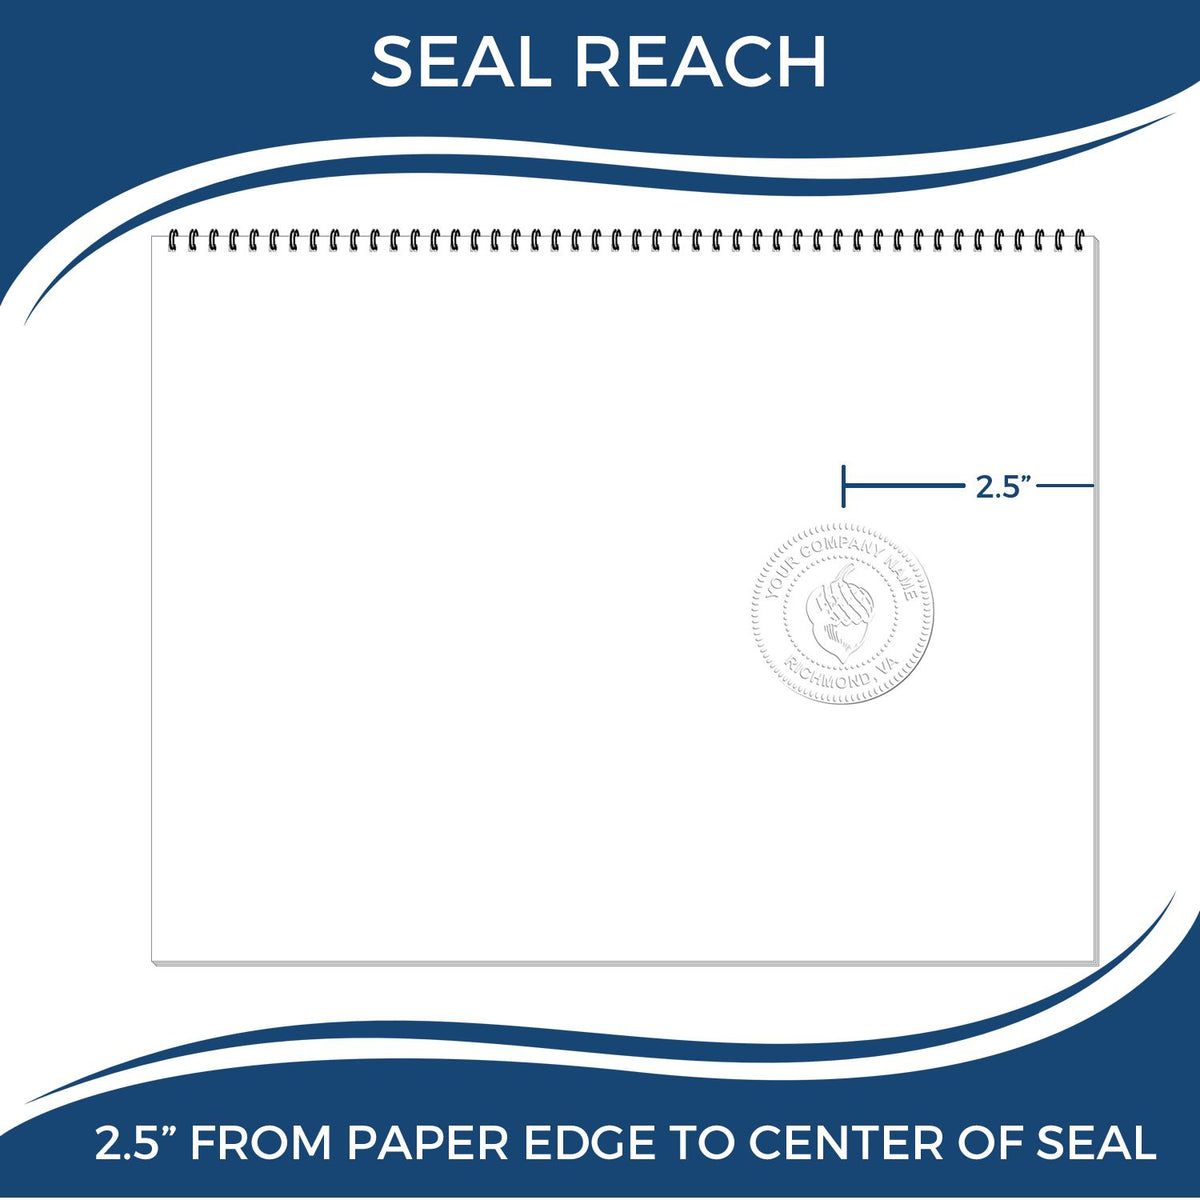 An infographic showing the seal reach which is represented by a ruler and a miniature seal image of the State of New Hampshire Long Reach Architectural Embossing Seal